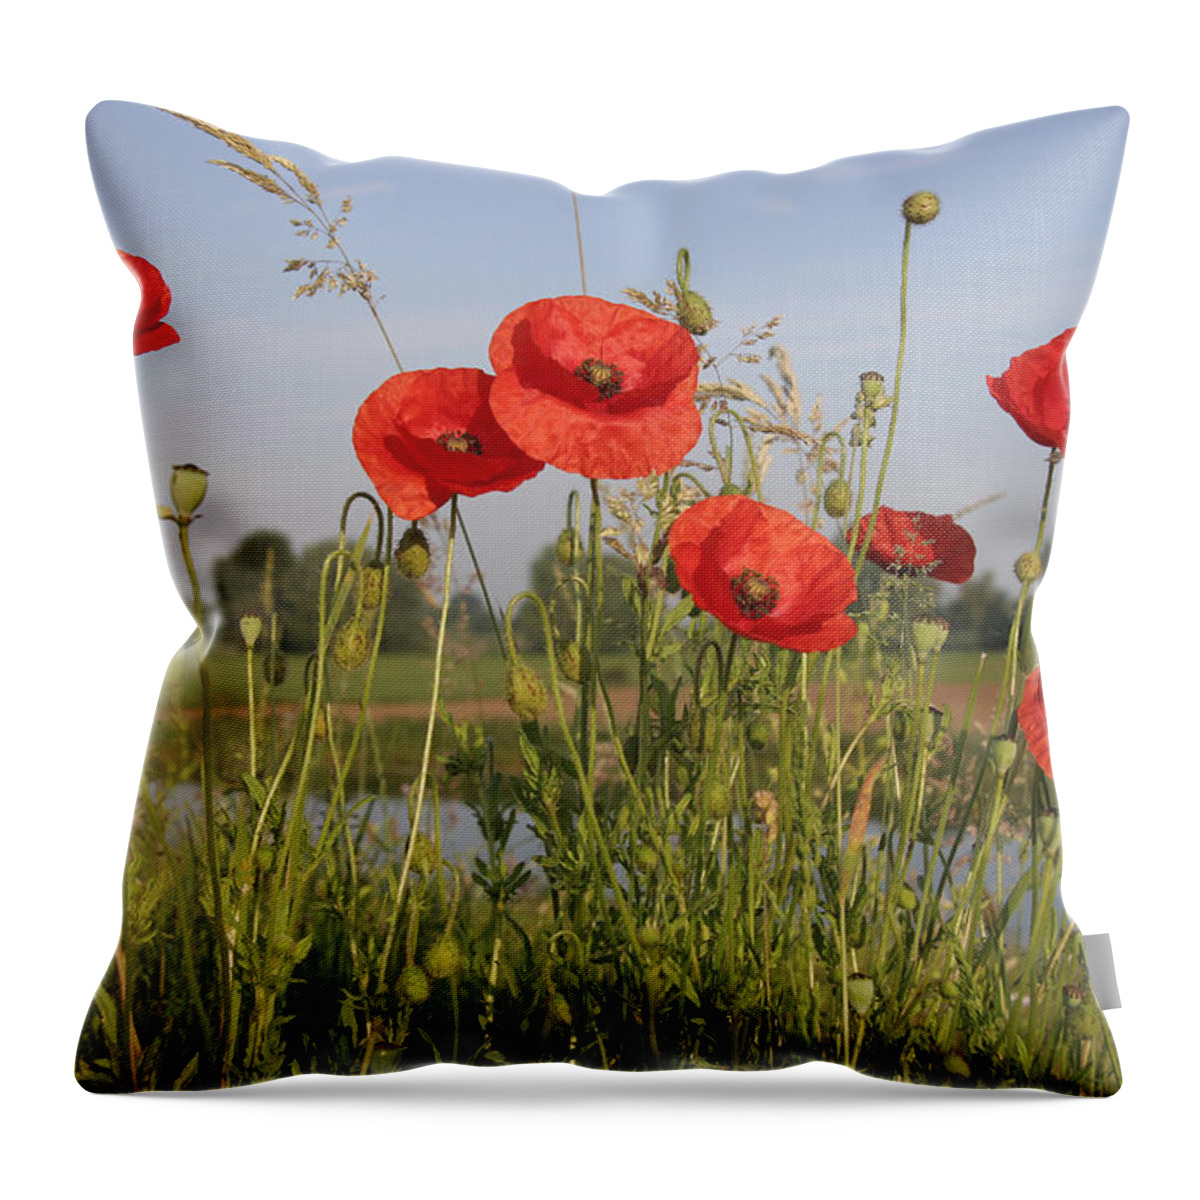 Fn Throw Pillow featuring the photograph Red Poppy Papaver Rhoeas Flowering by Gerard Schouten